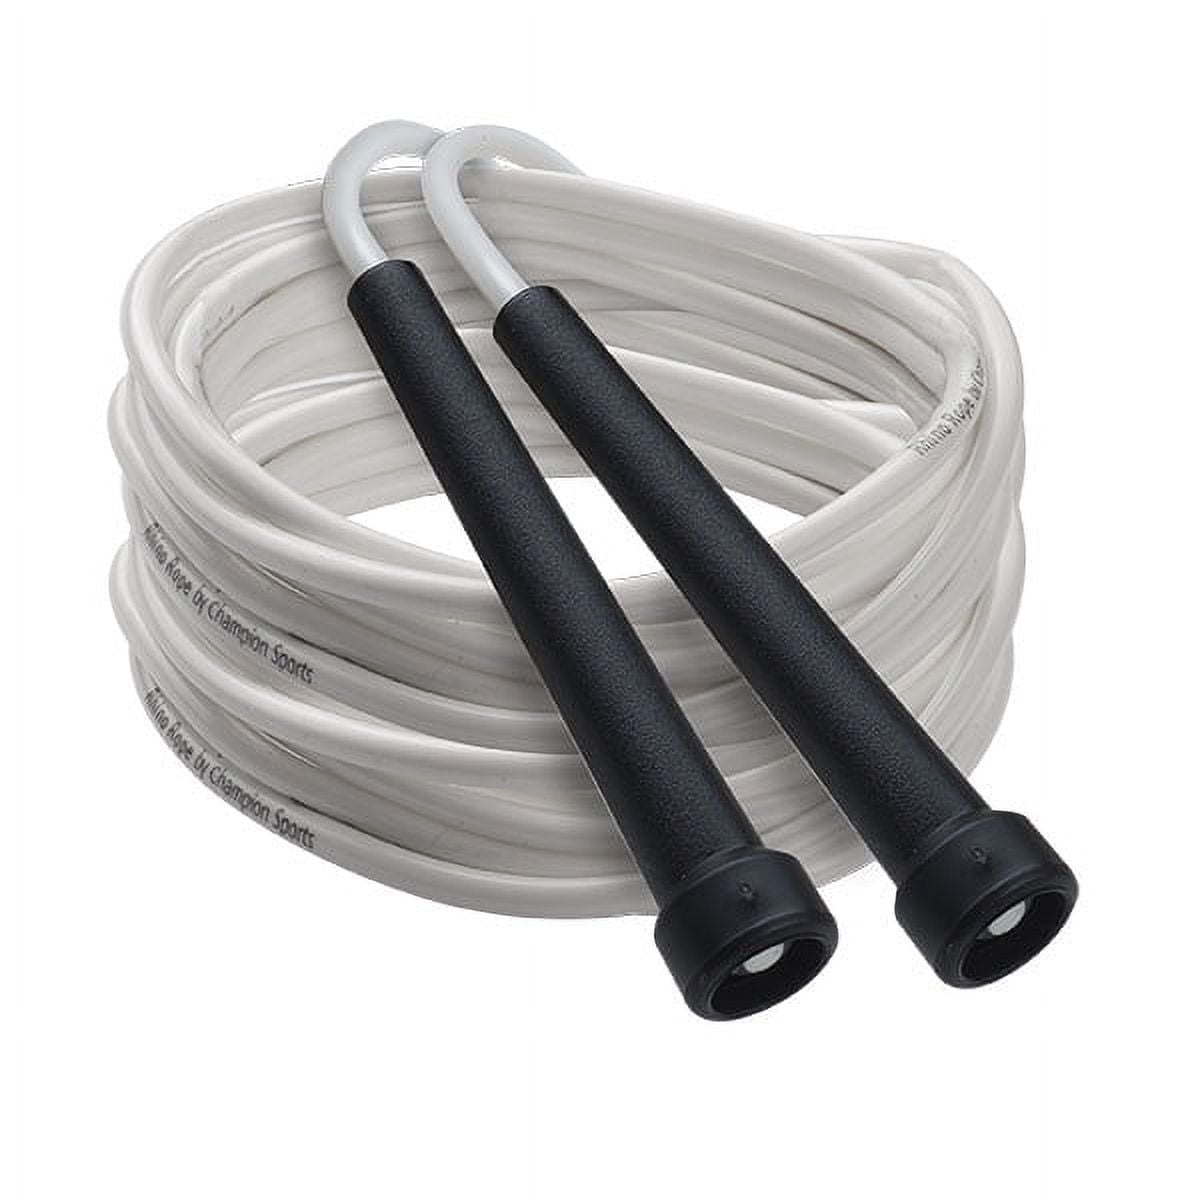 Picture of Champion Sports RSR16SET 16 ft. Rhino High Performance Licorice Speed Rope Set, White & Purple - Set of 6